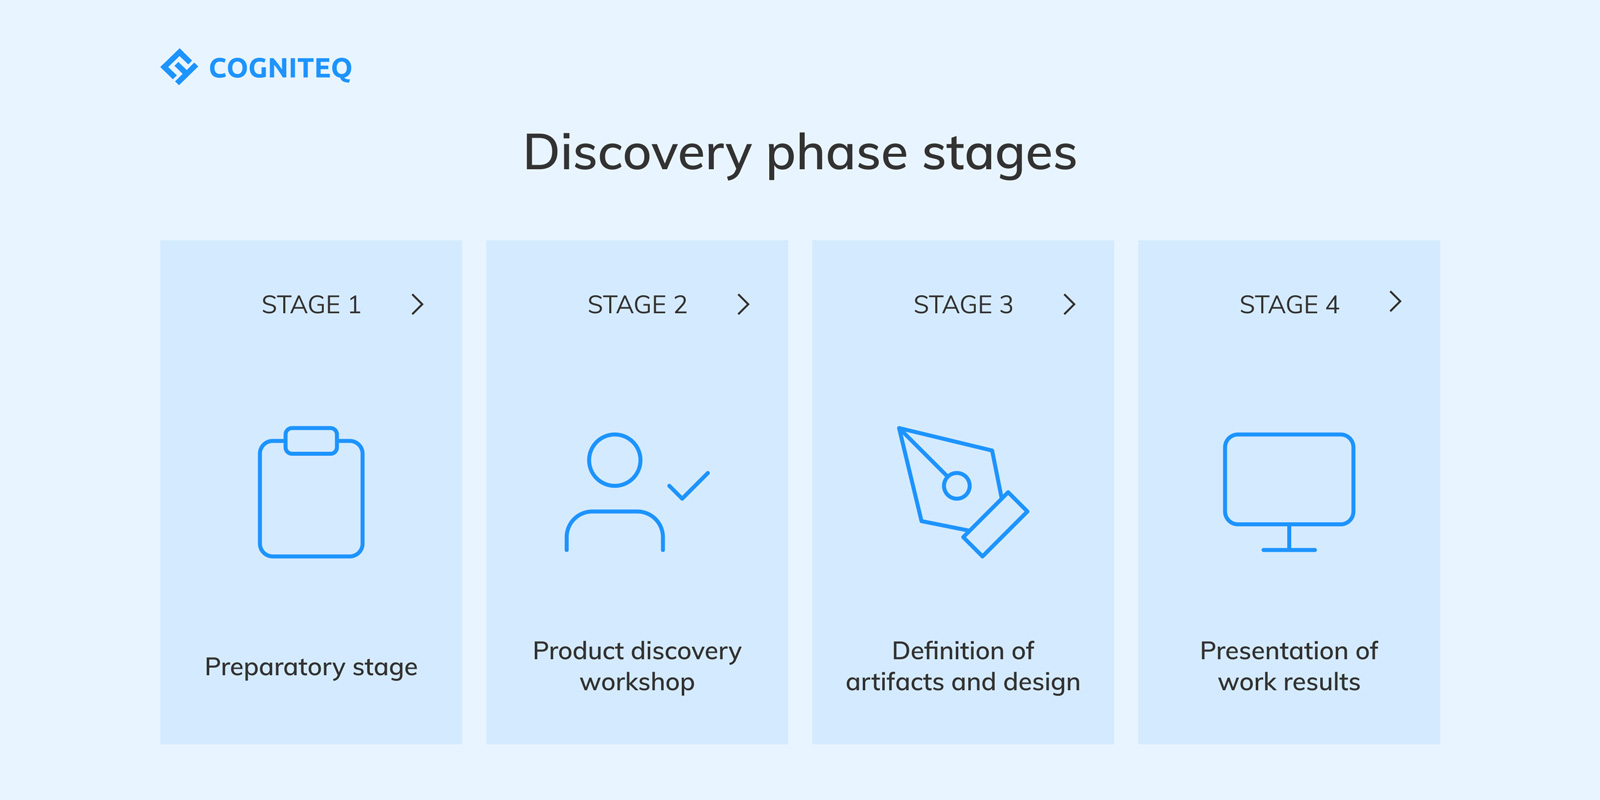 Discovery phase stages